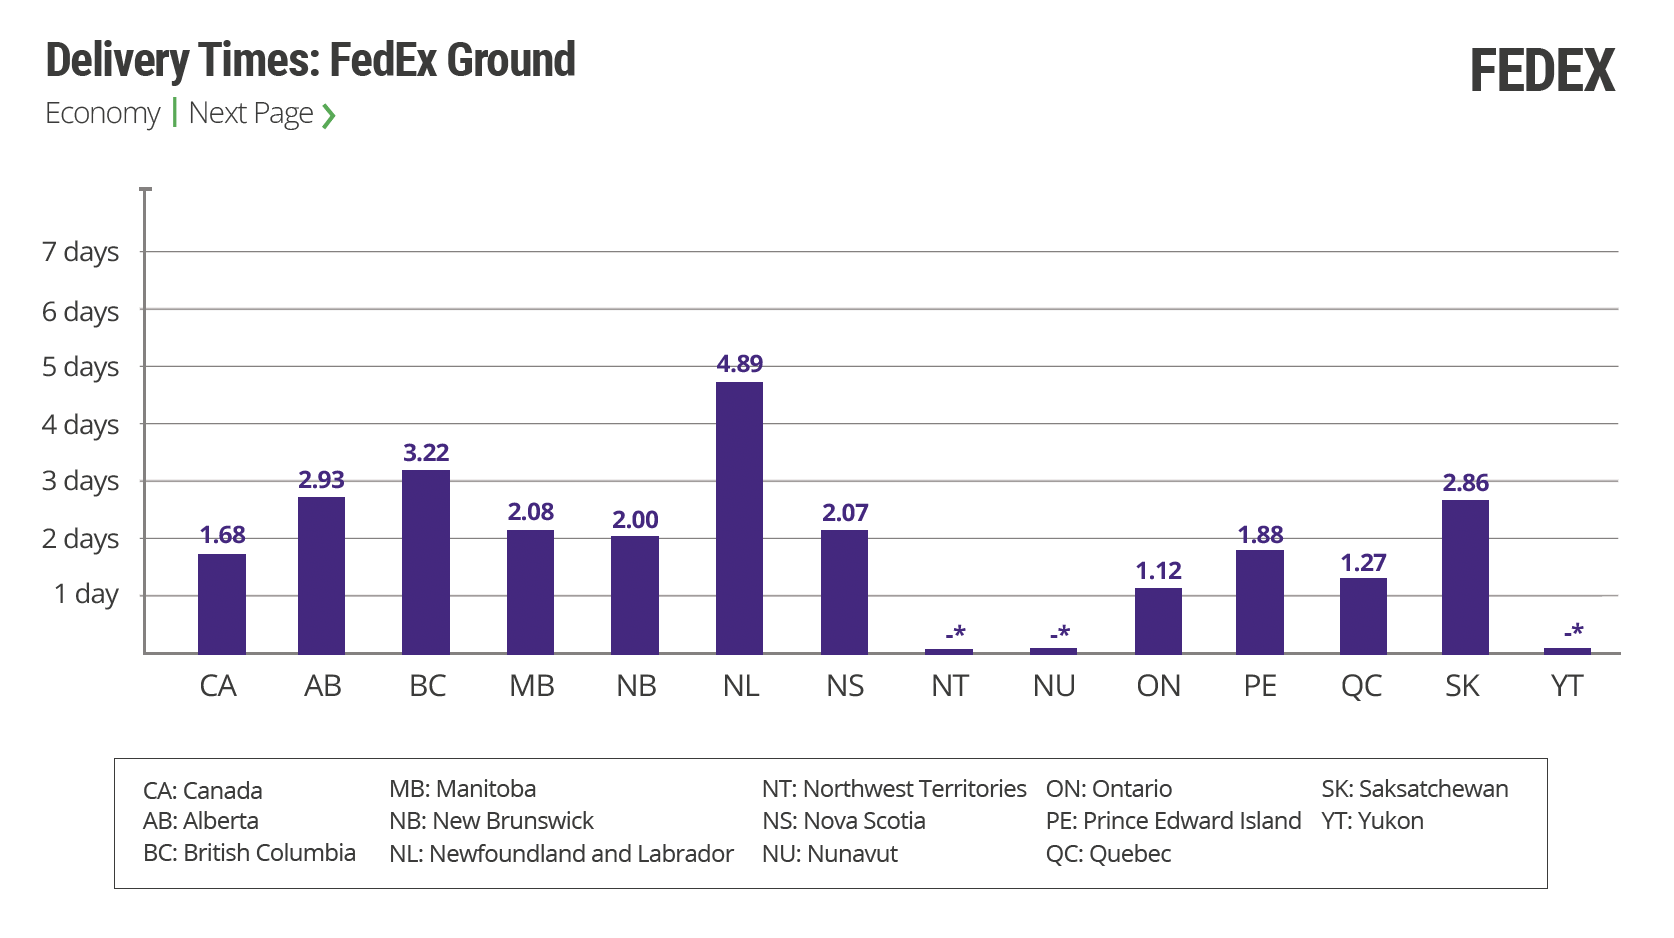 Fedex-ground-time of Deliveries in Canada- Q2 2023